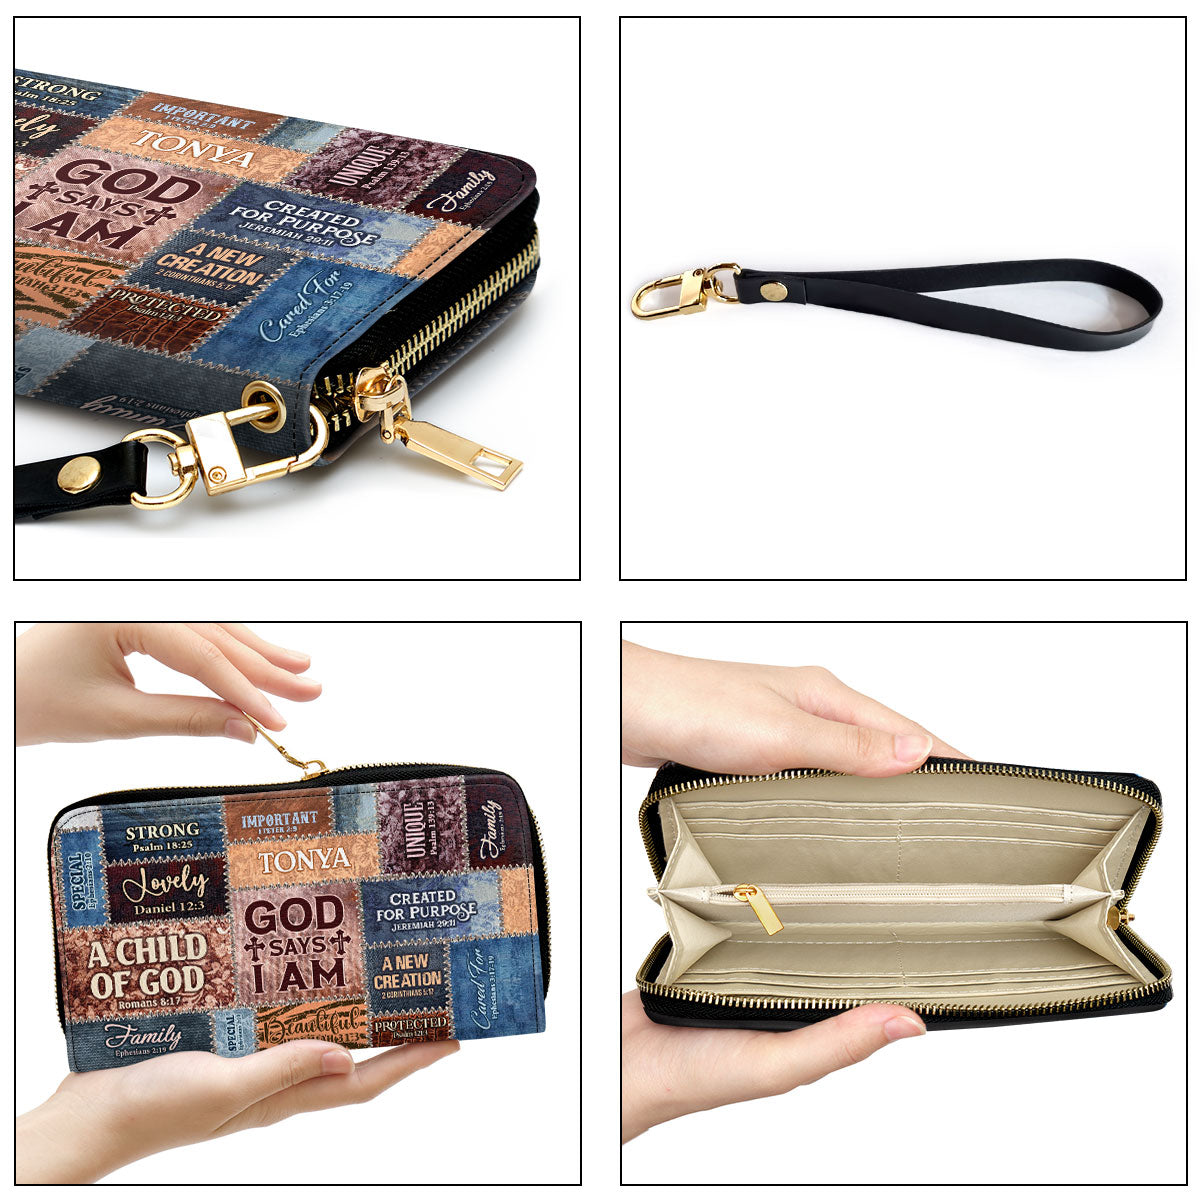 Jesuspirit | Personalized Leather Clutch Purse With Wristlet Strap Handle | Spiritual Gifts For Christian Women | God Says I Am CPM739